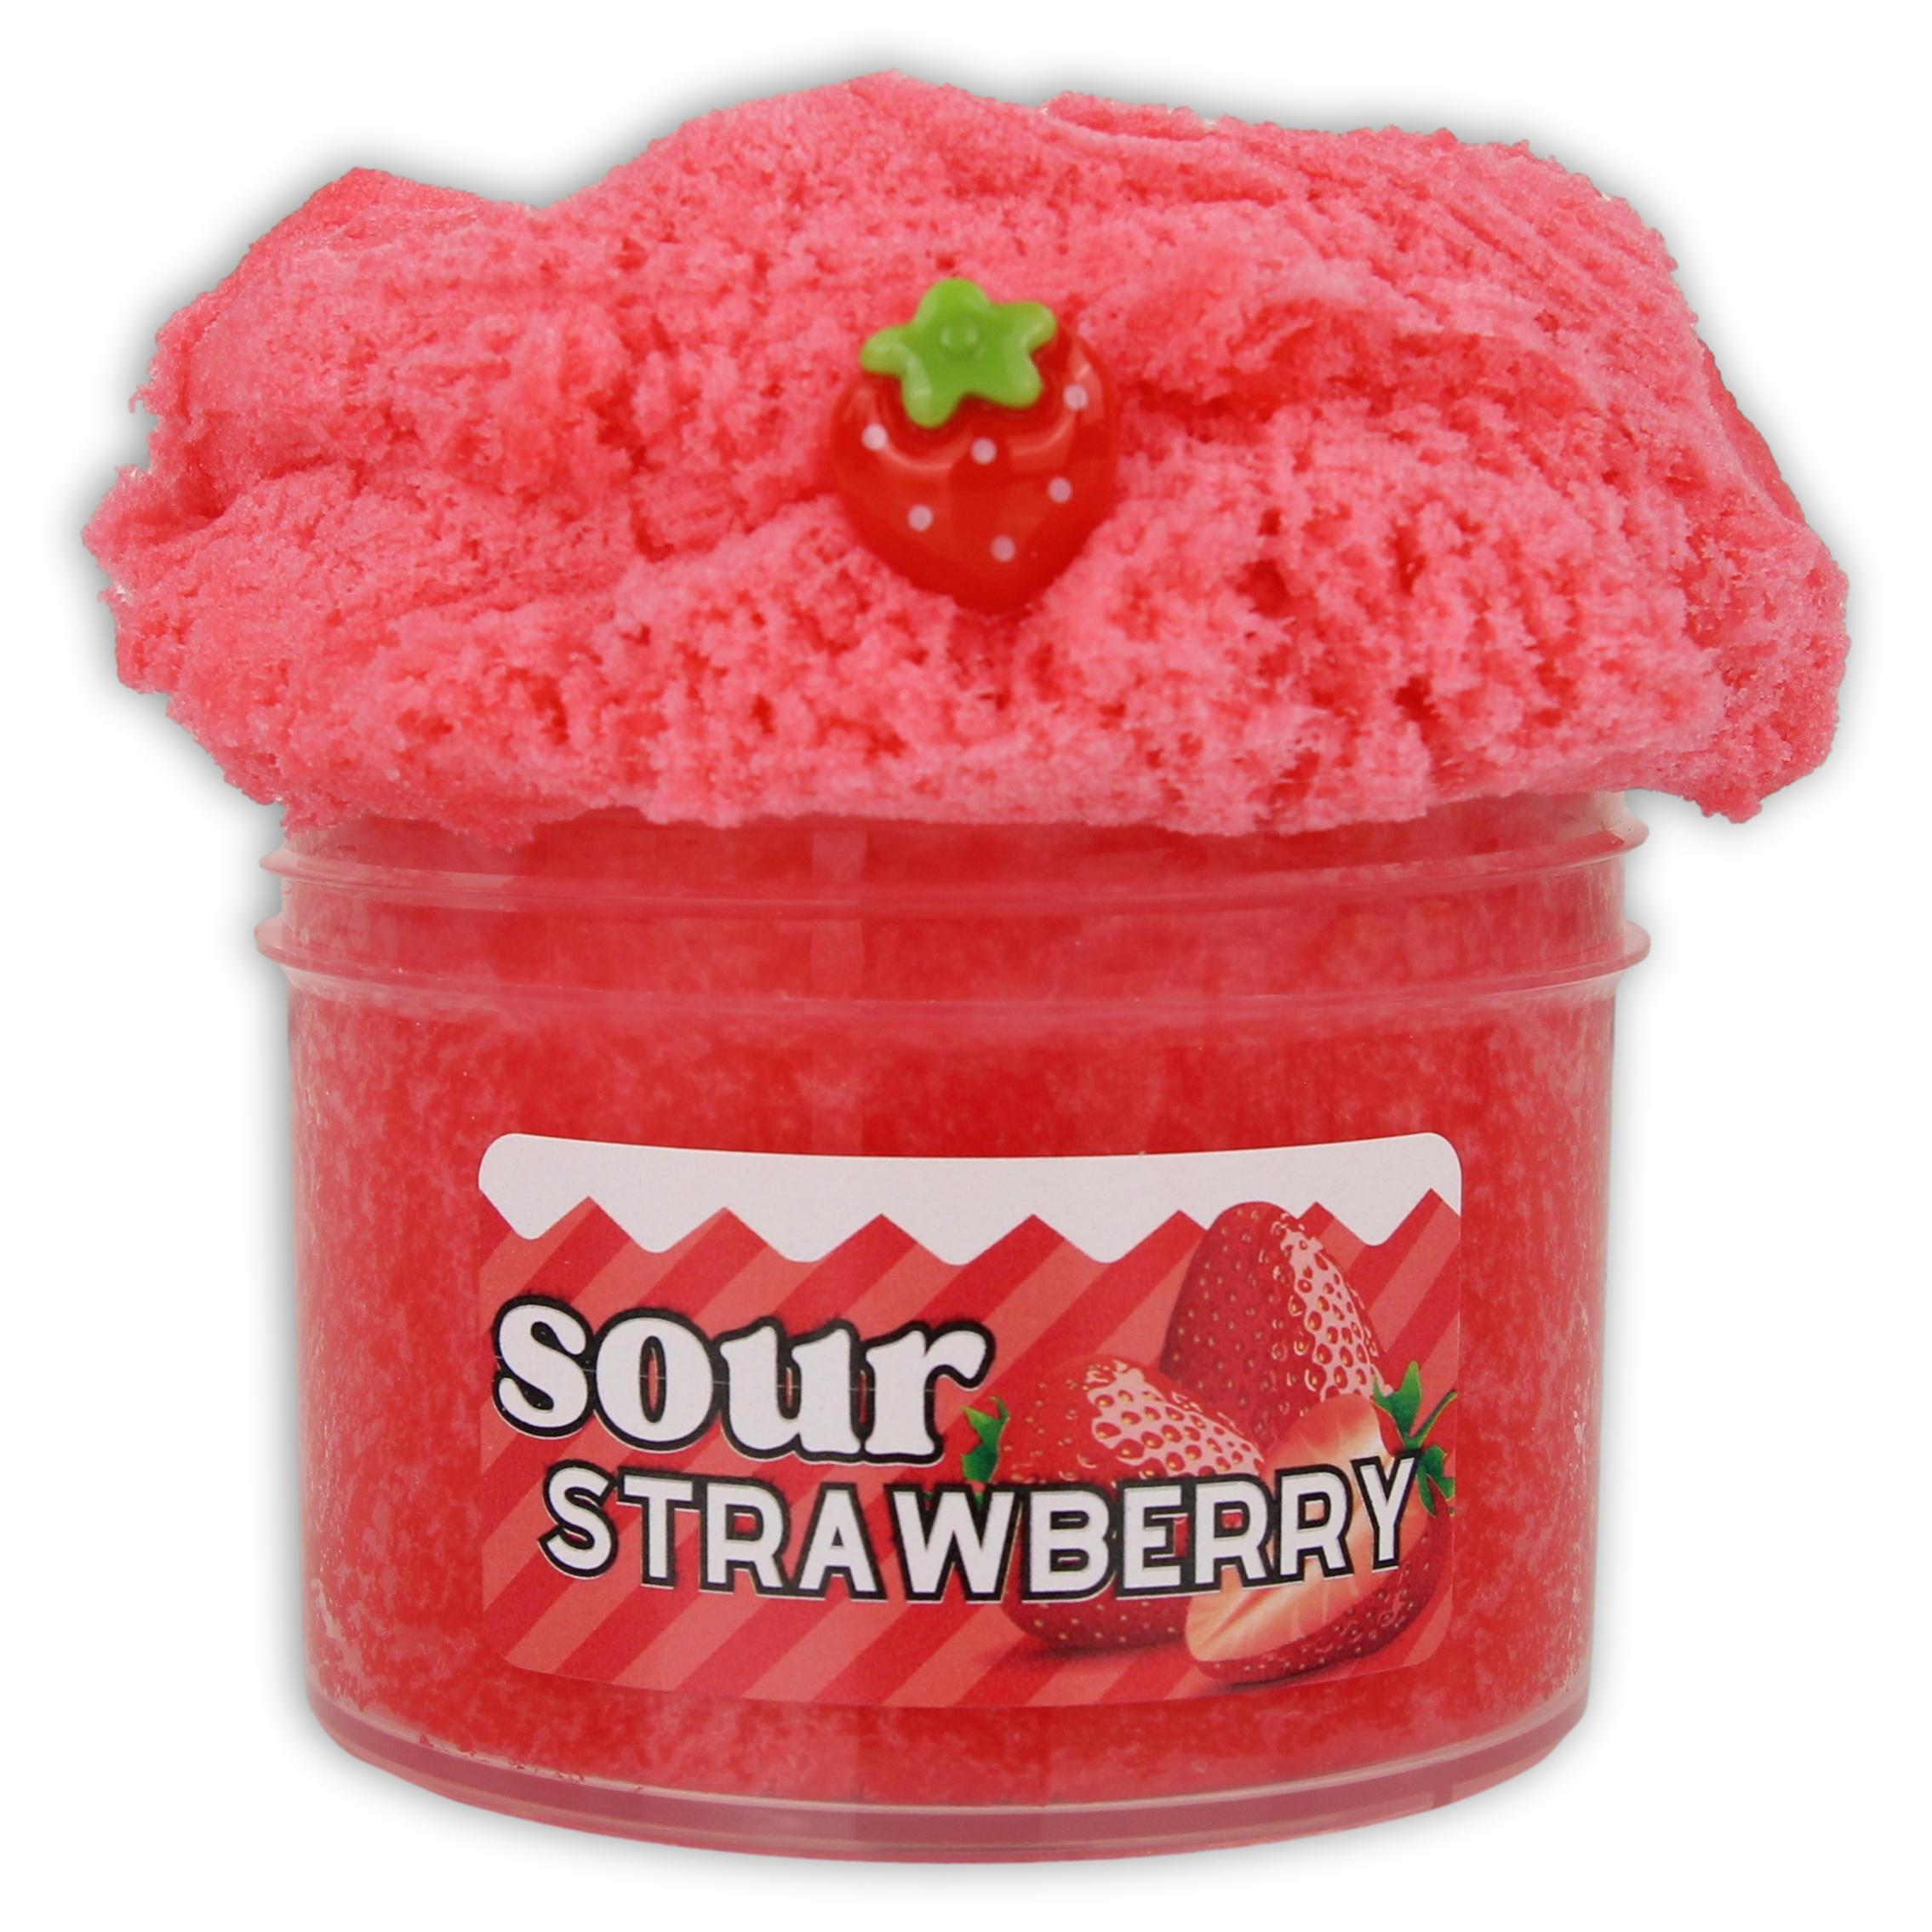 Strawberry Sour Slime by Dope Slimes #WS2SP1118